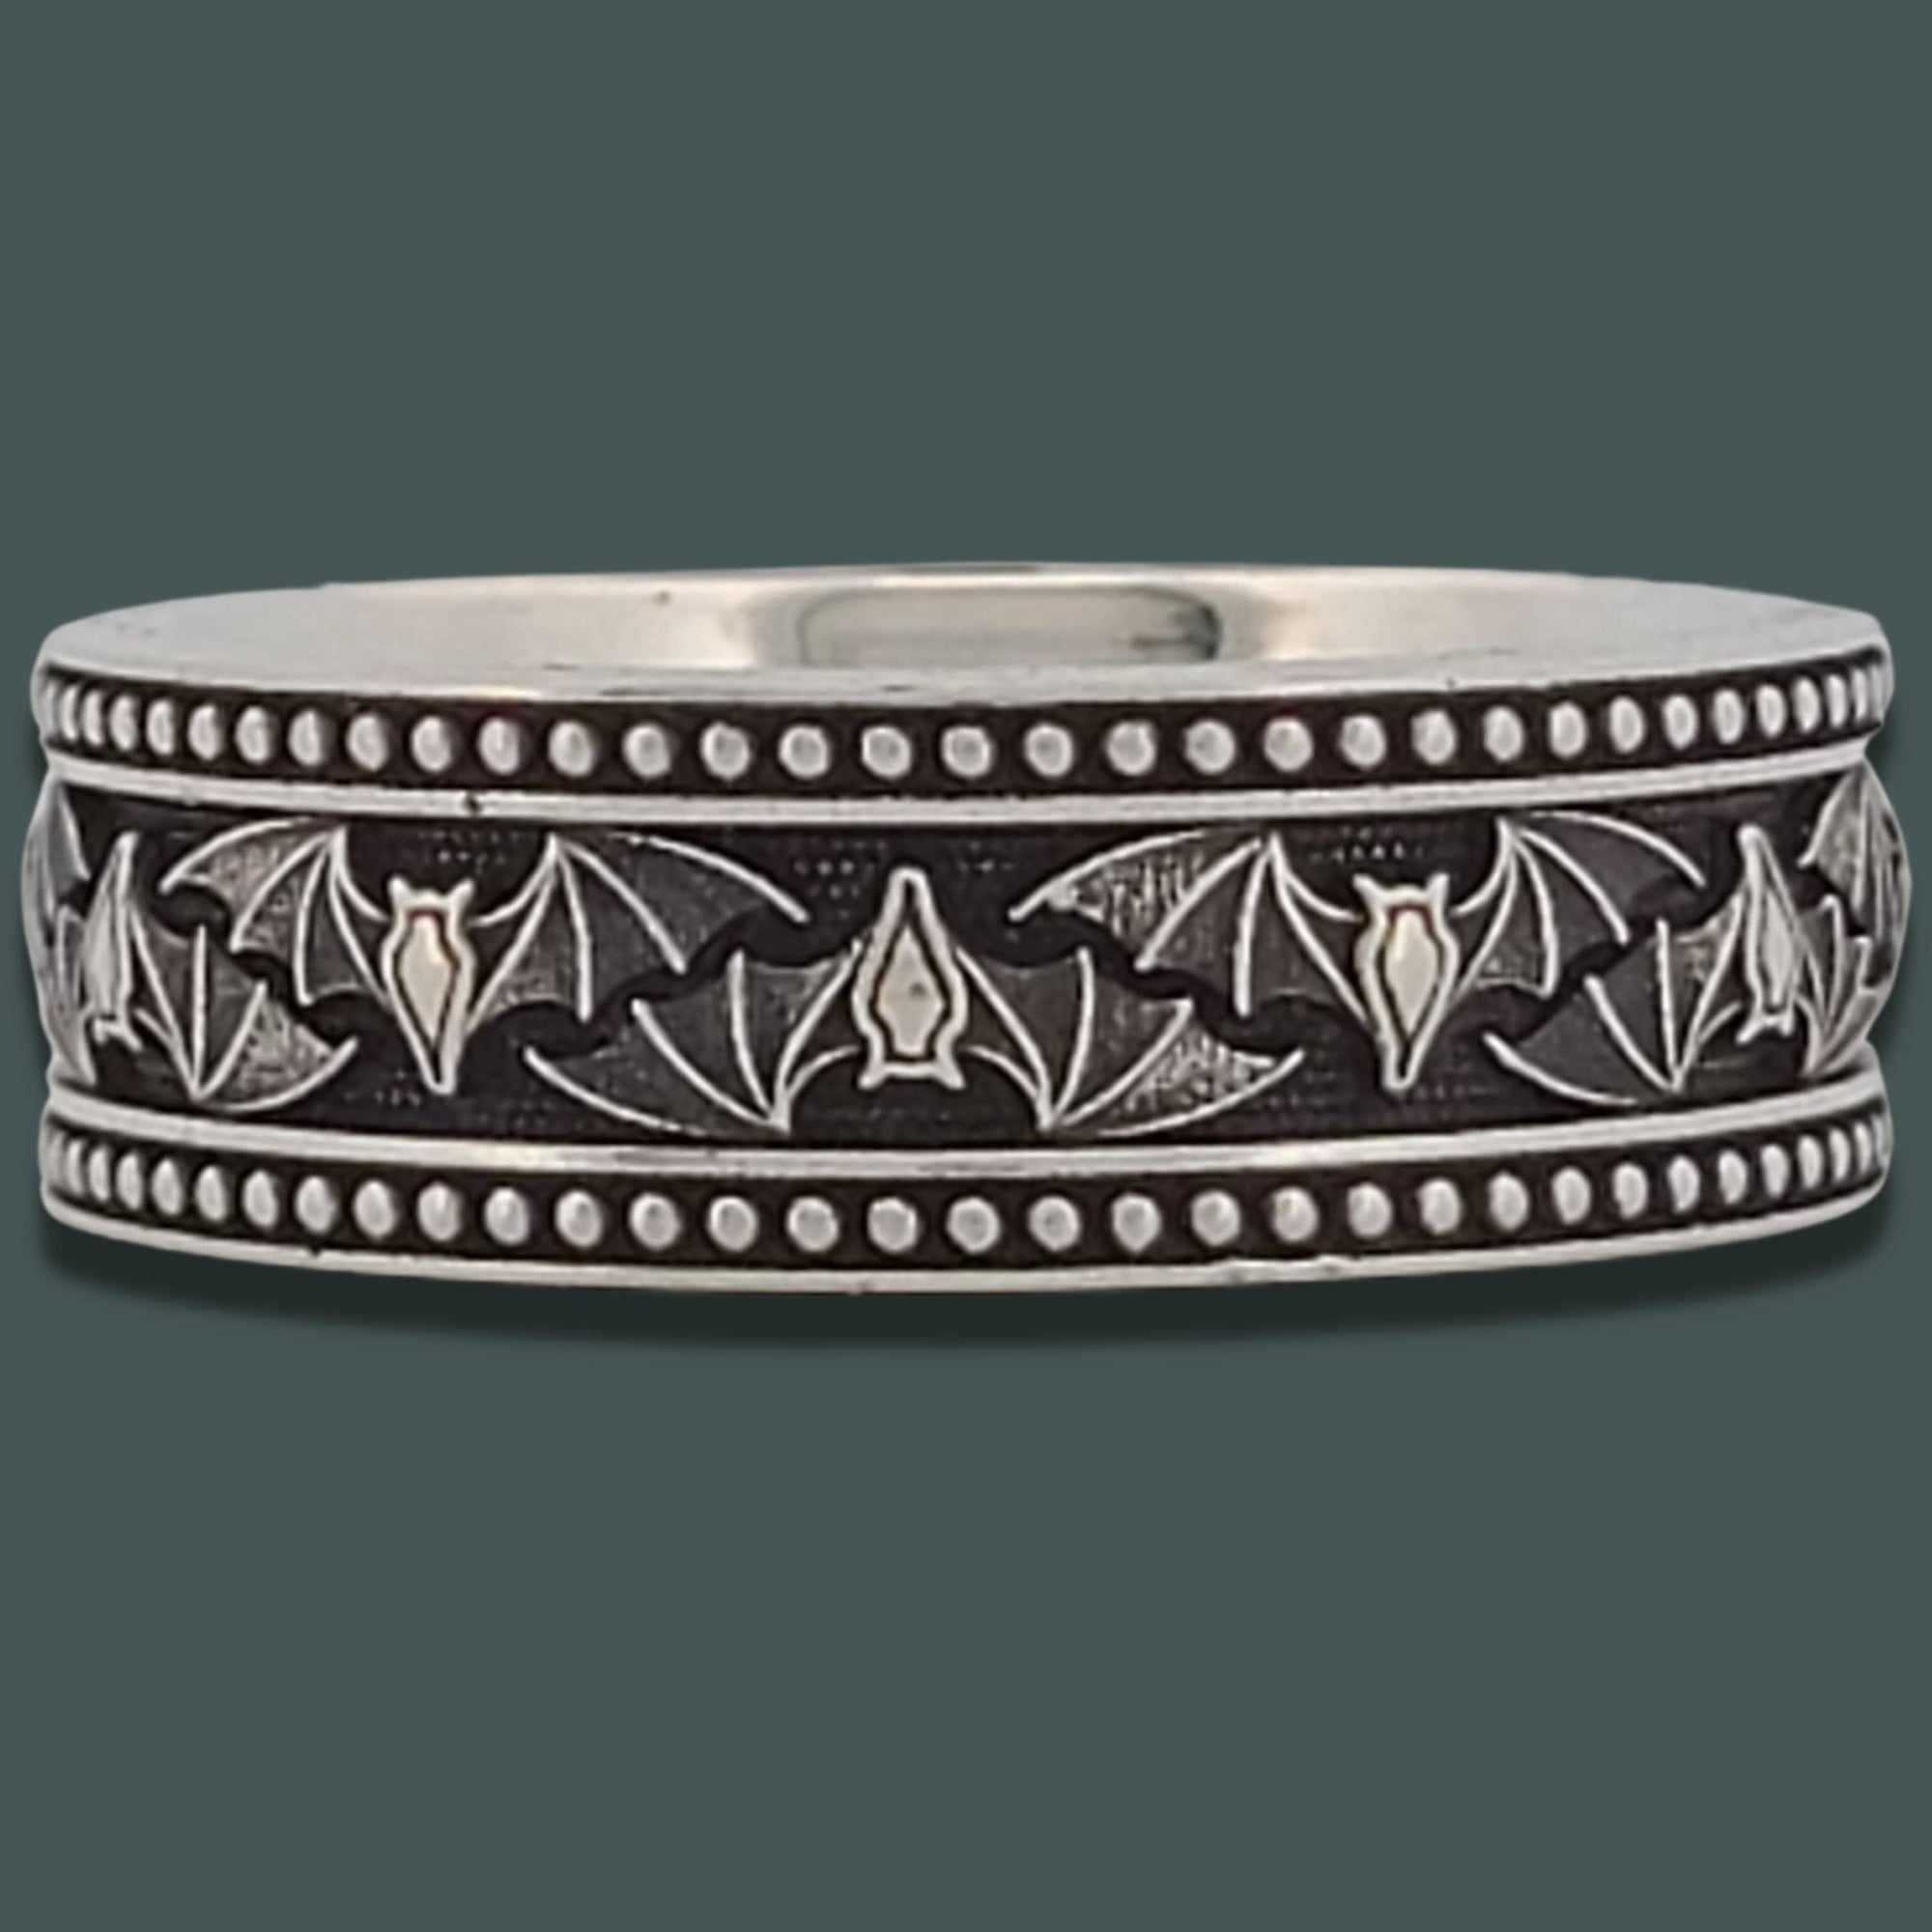 BAT NARROW BEADED Band Ring - Starting at $139 - Celtic Jewelscapes